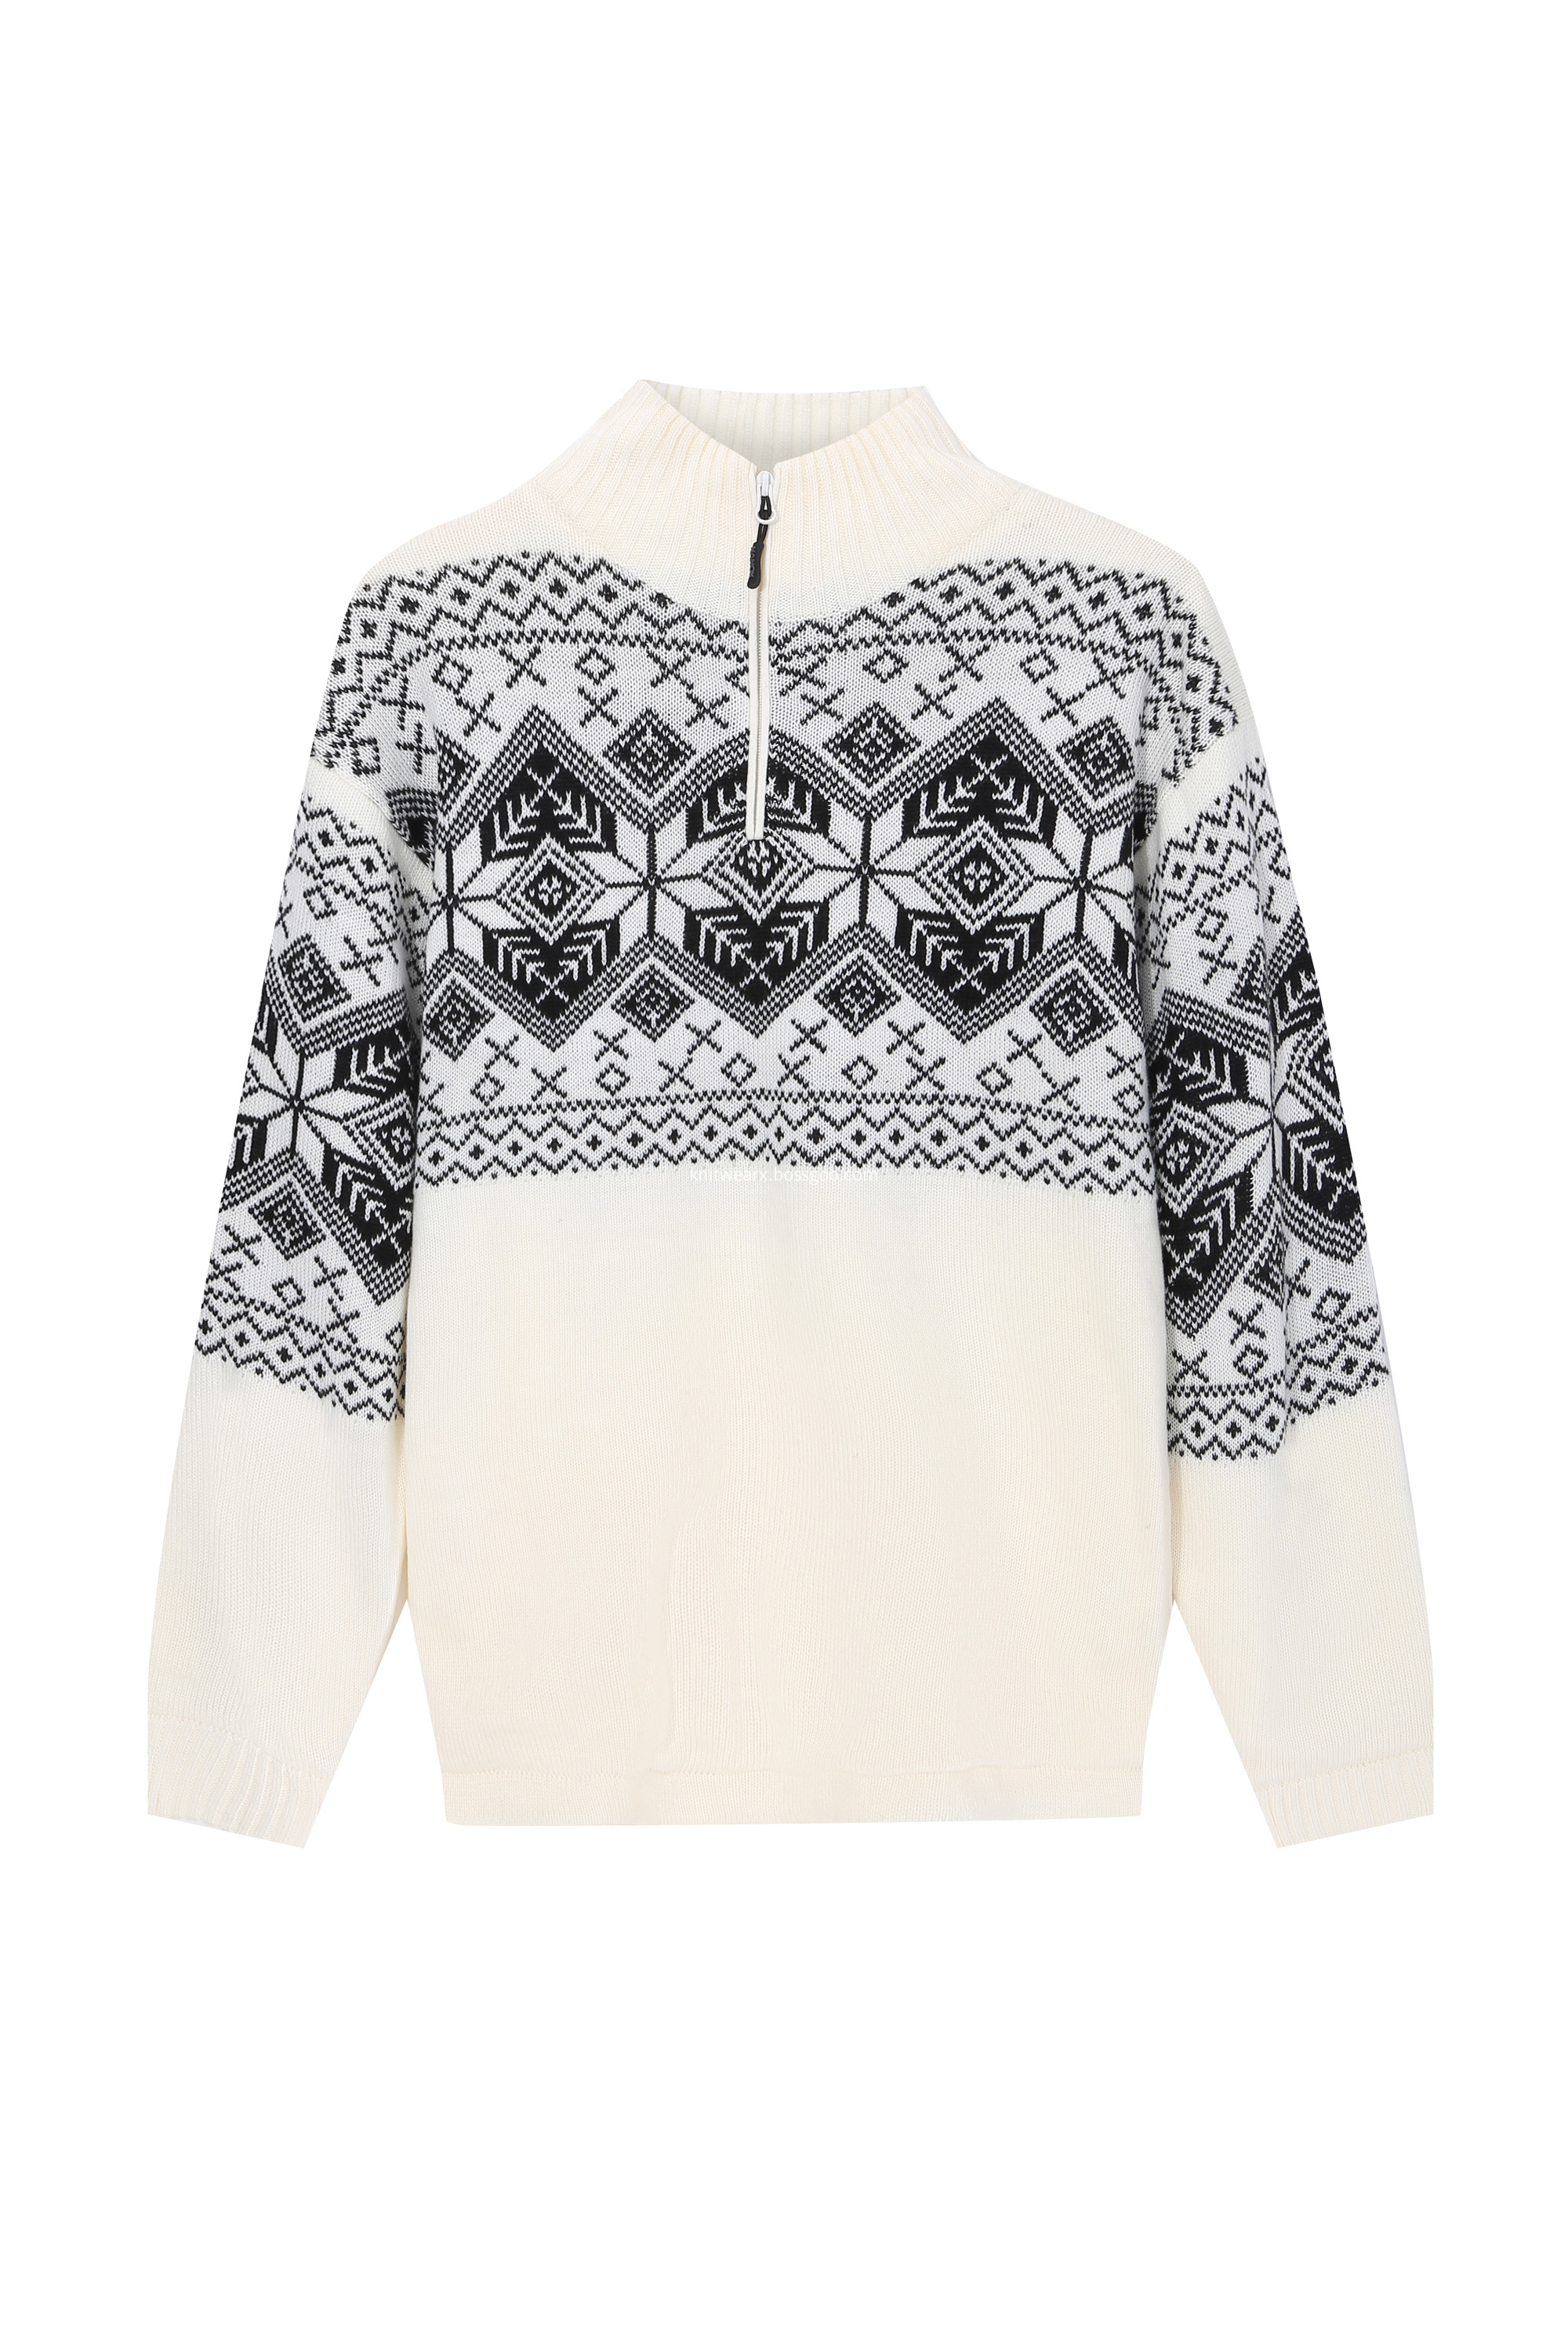 Men's Knitted Jacquard Half-Zip Lined Pullover